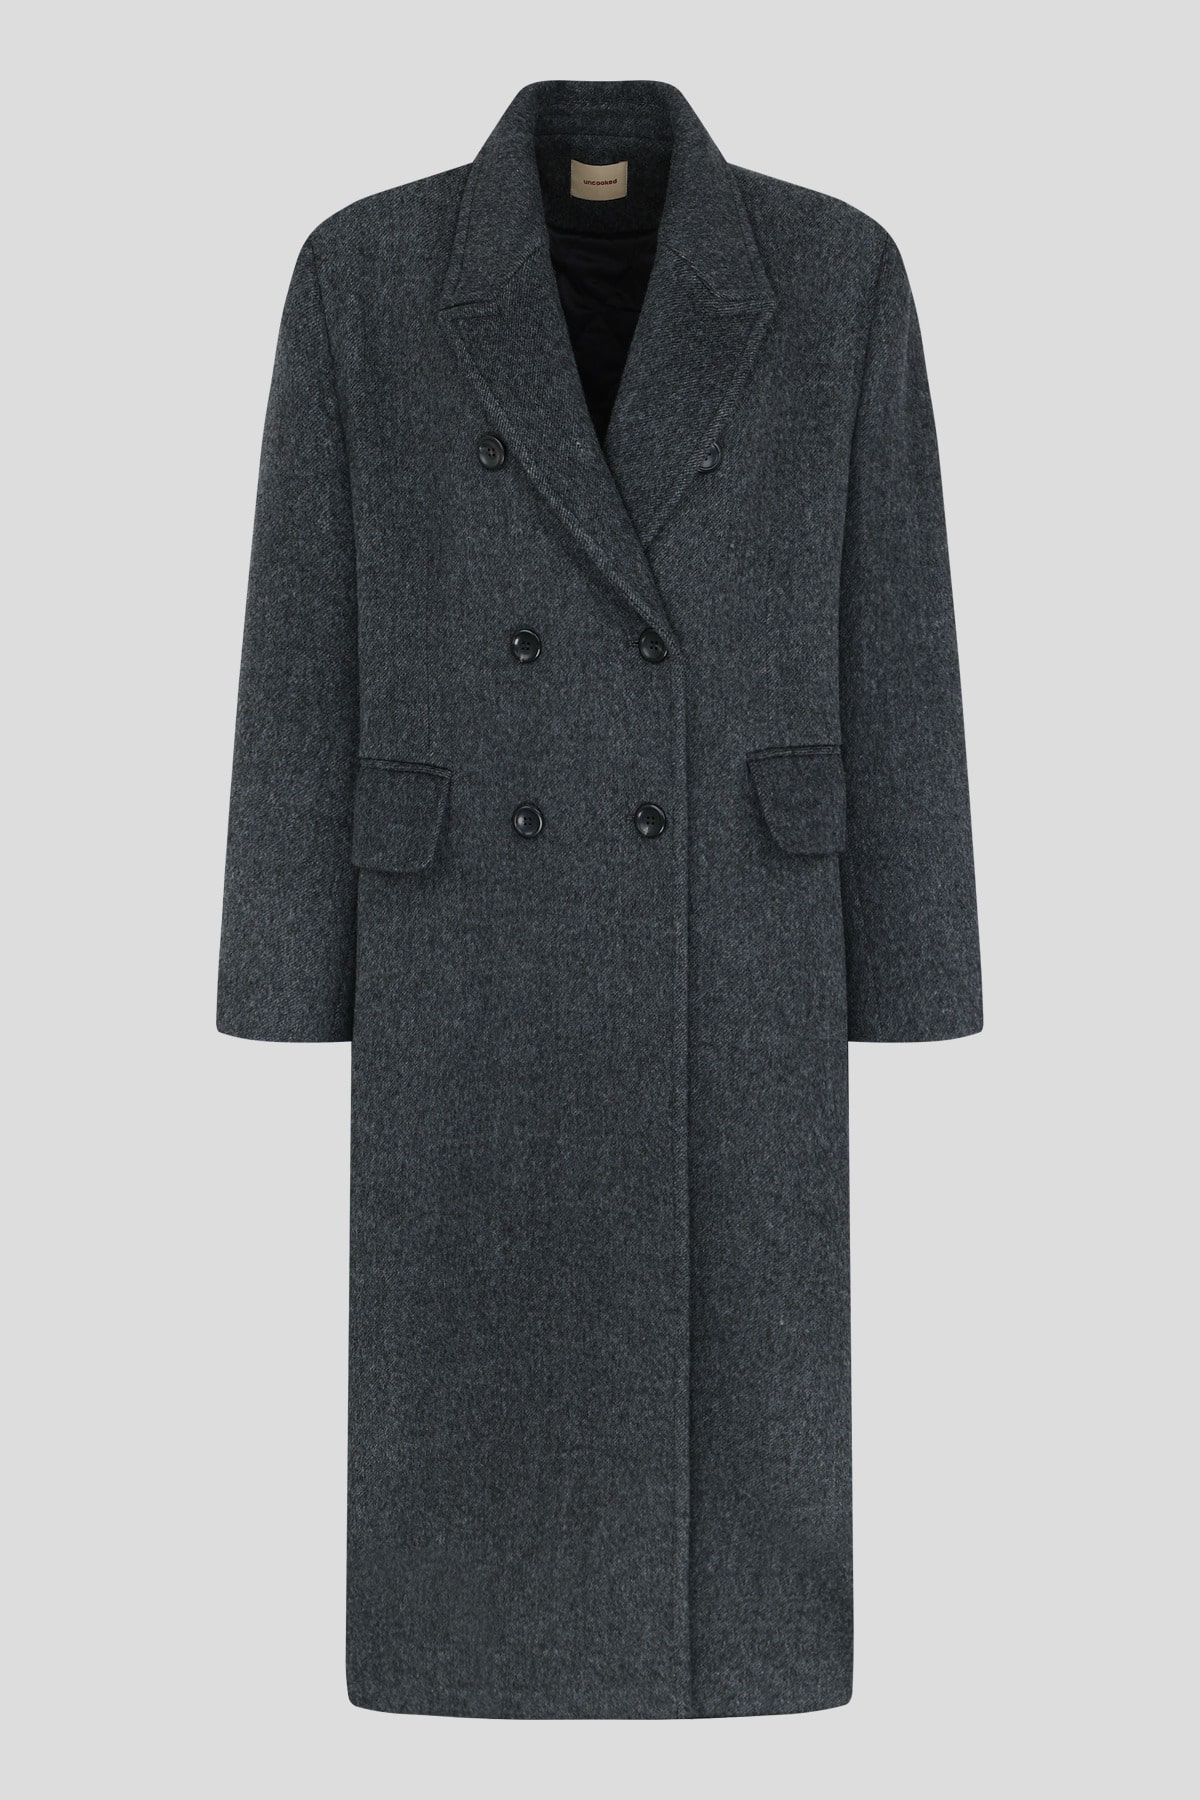 [2rd reorder]Heavy wool over double coat(charcoal)